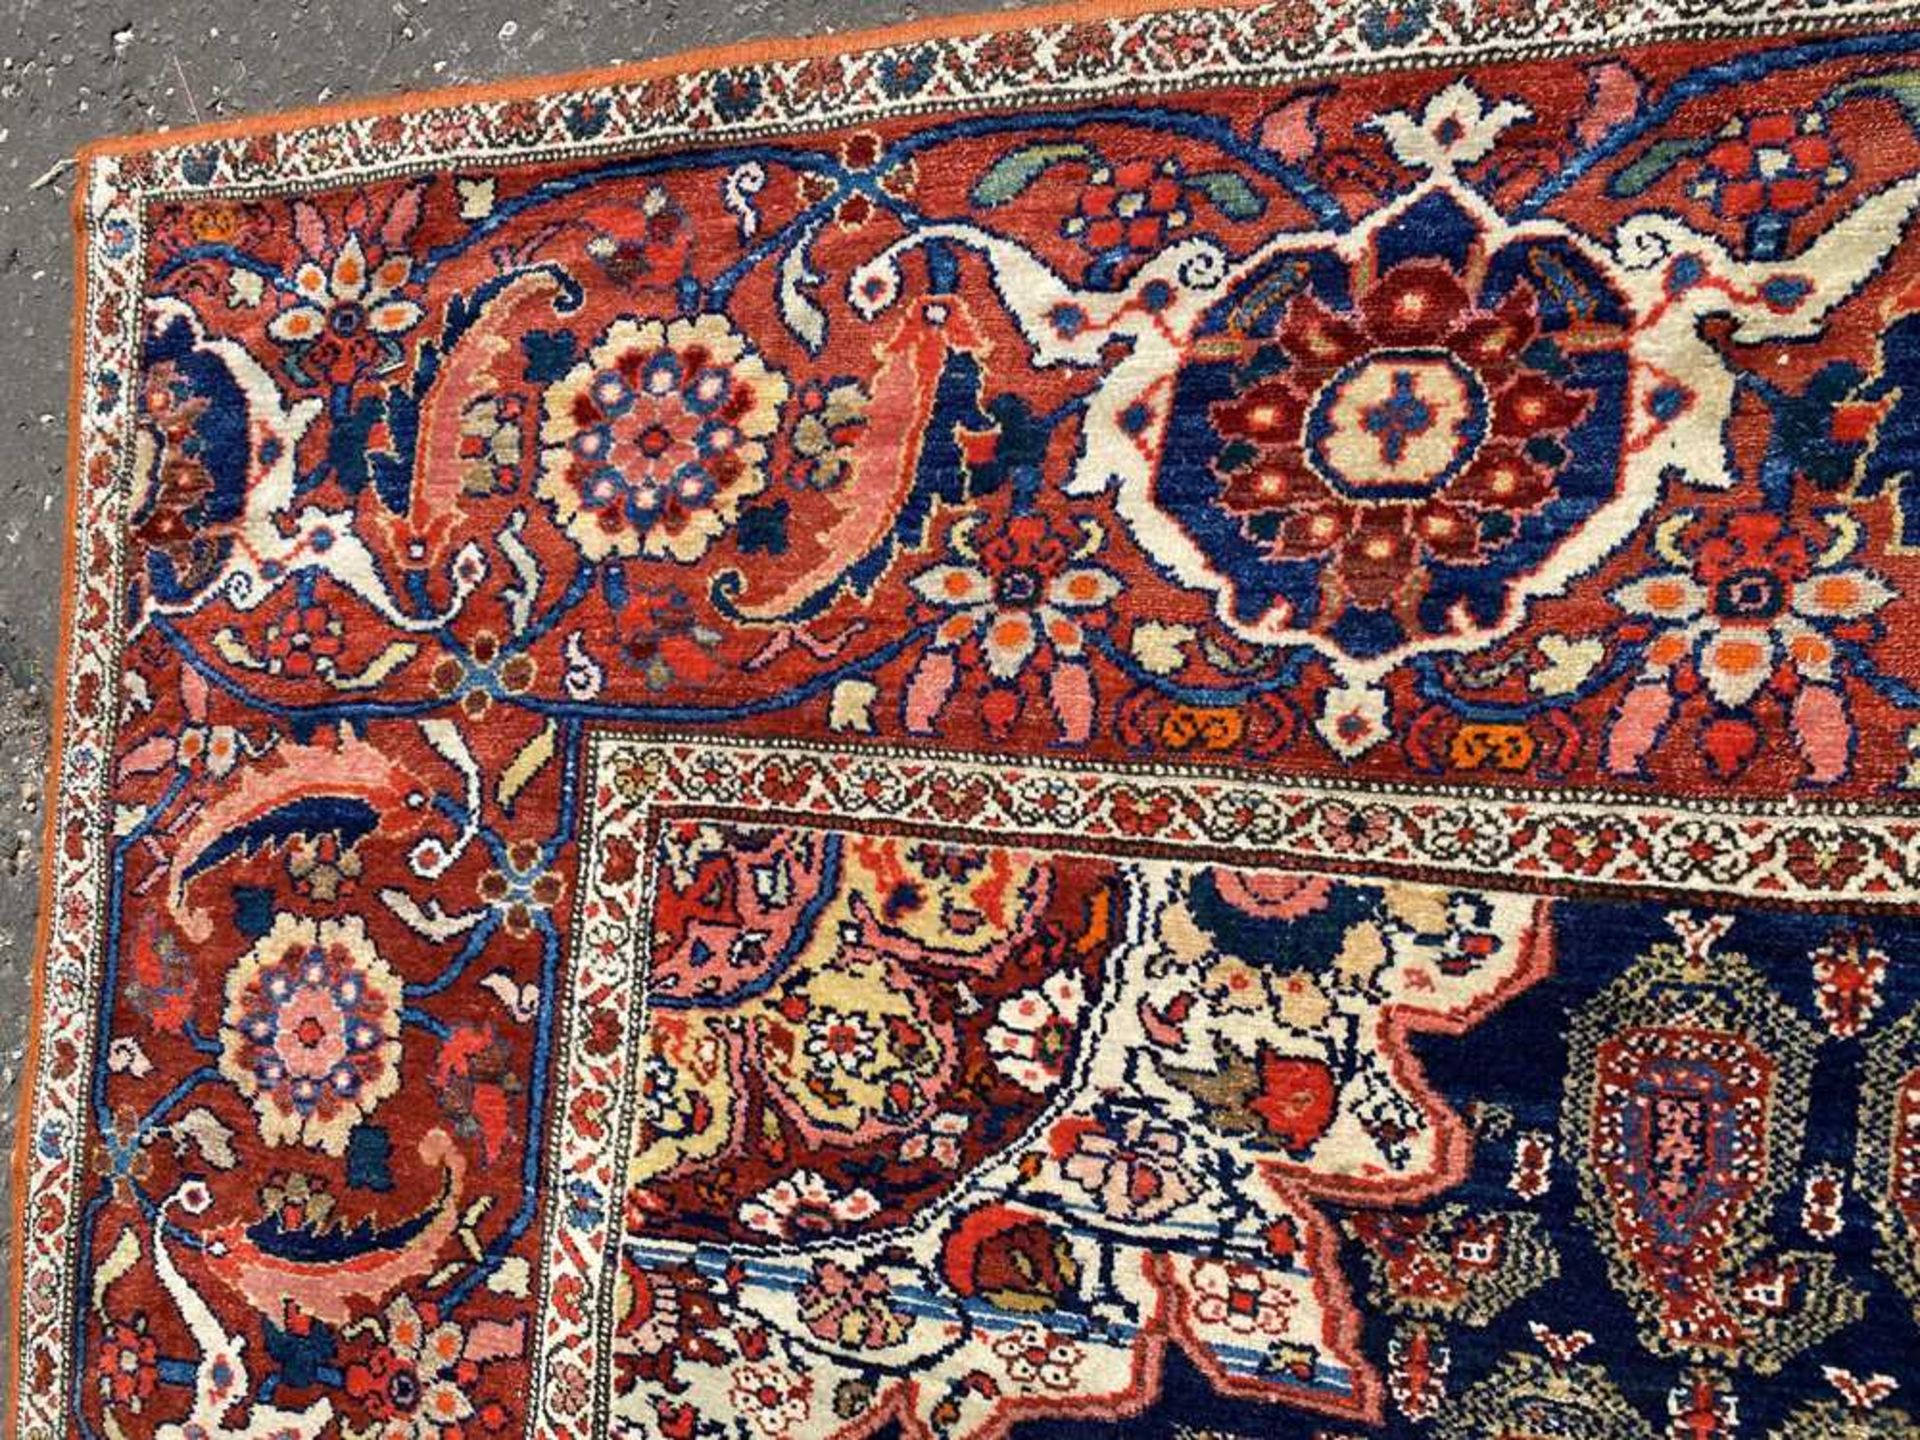 LARGE BAKHTIARI CARPET WEST PERSIA, LATE 19TH/EARLY 20TH CENTURY - Image 2 of 8